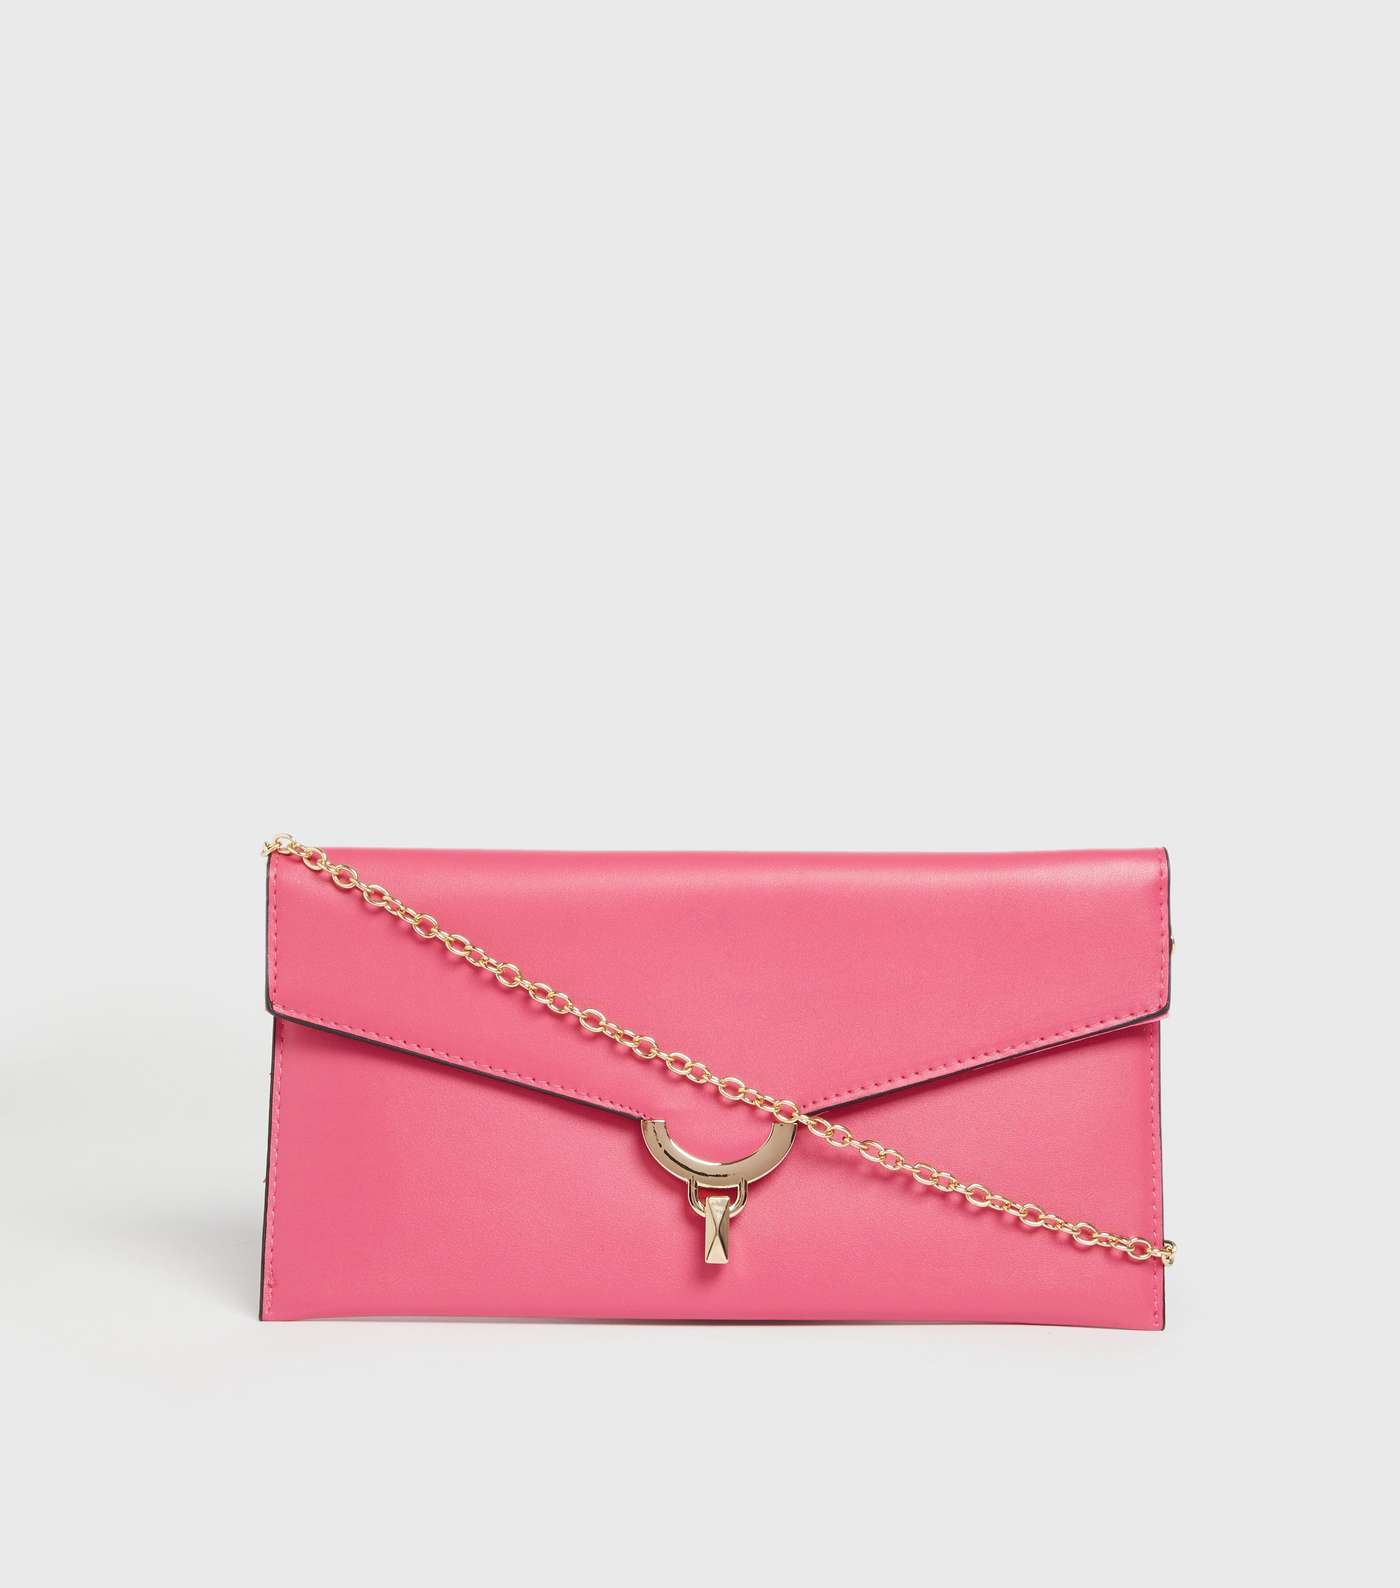 Bright Pink Foldover Chain Clutch Bag